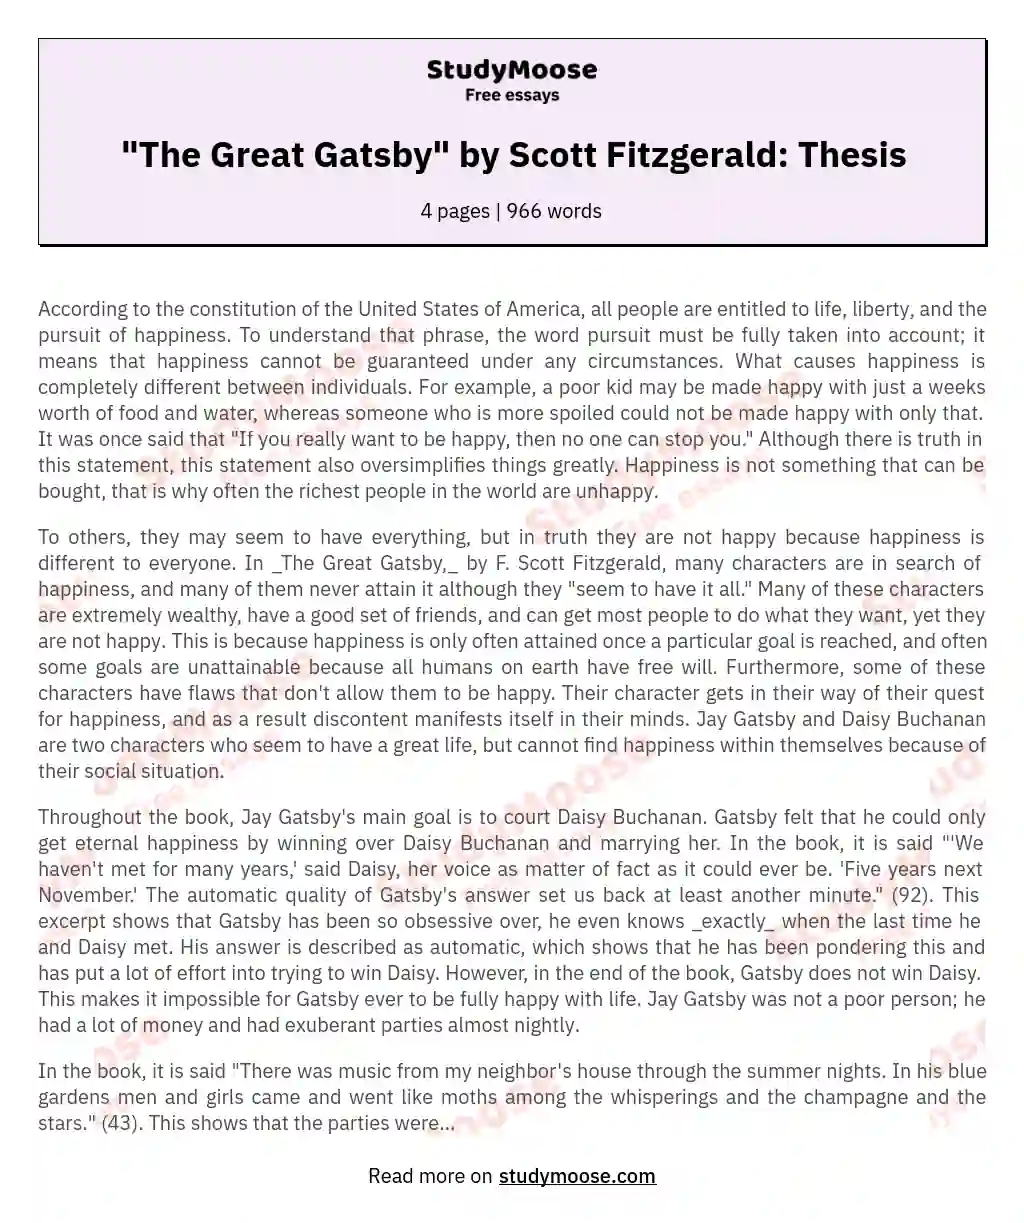 "The Great Gatsby" by Scott Fitzgerald: Thesis